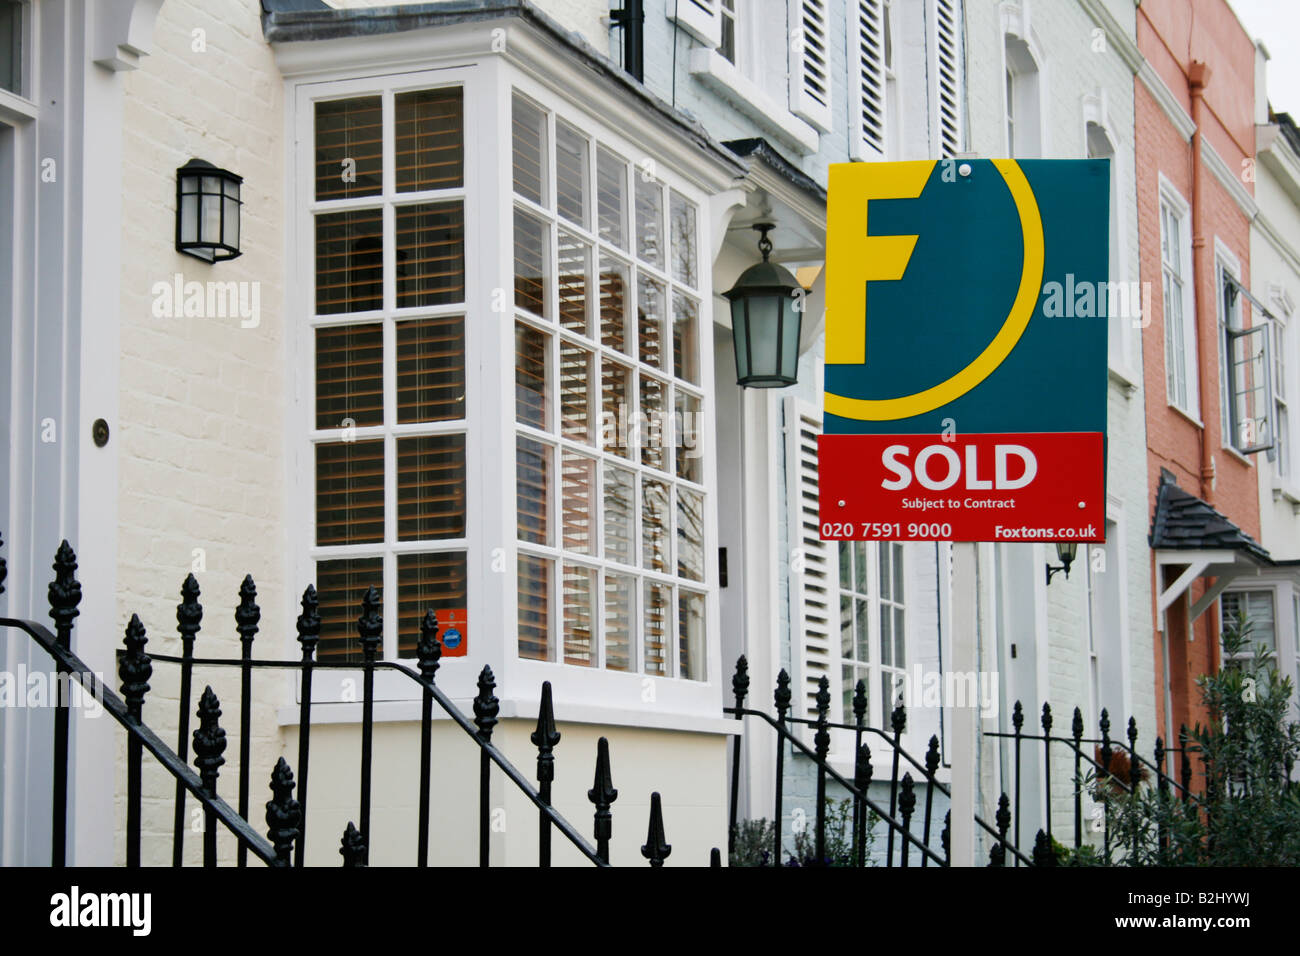 White Kensington house with Sold sign Stock Photo